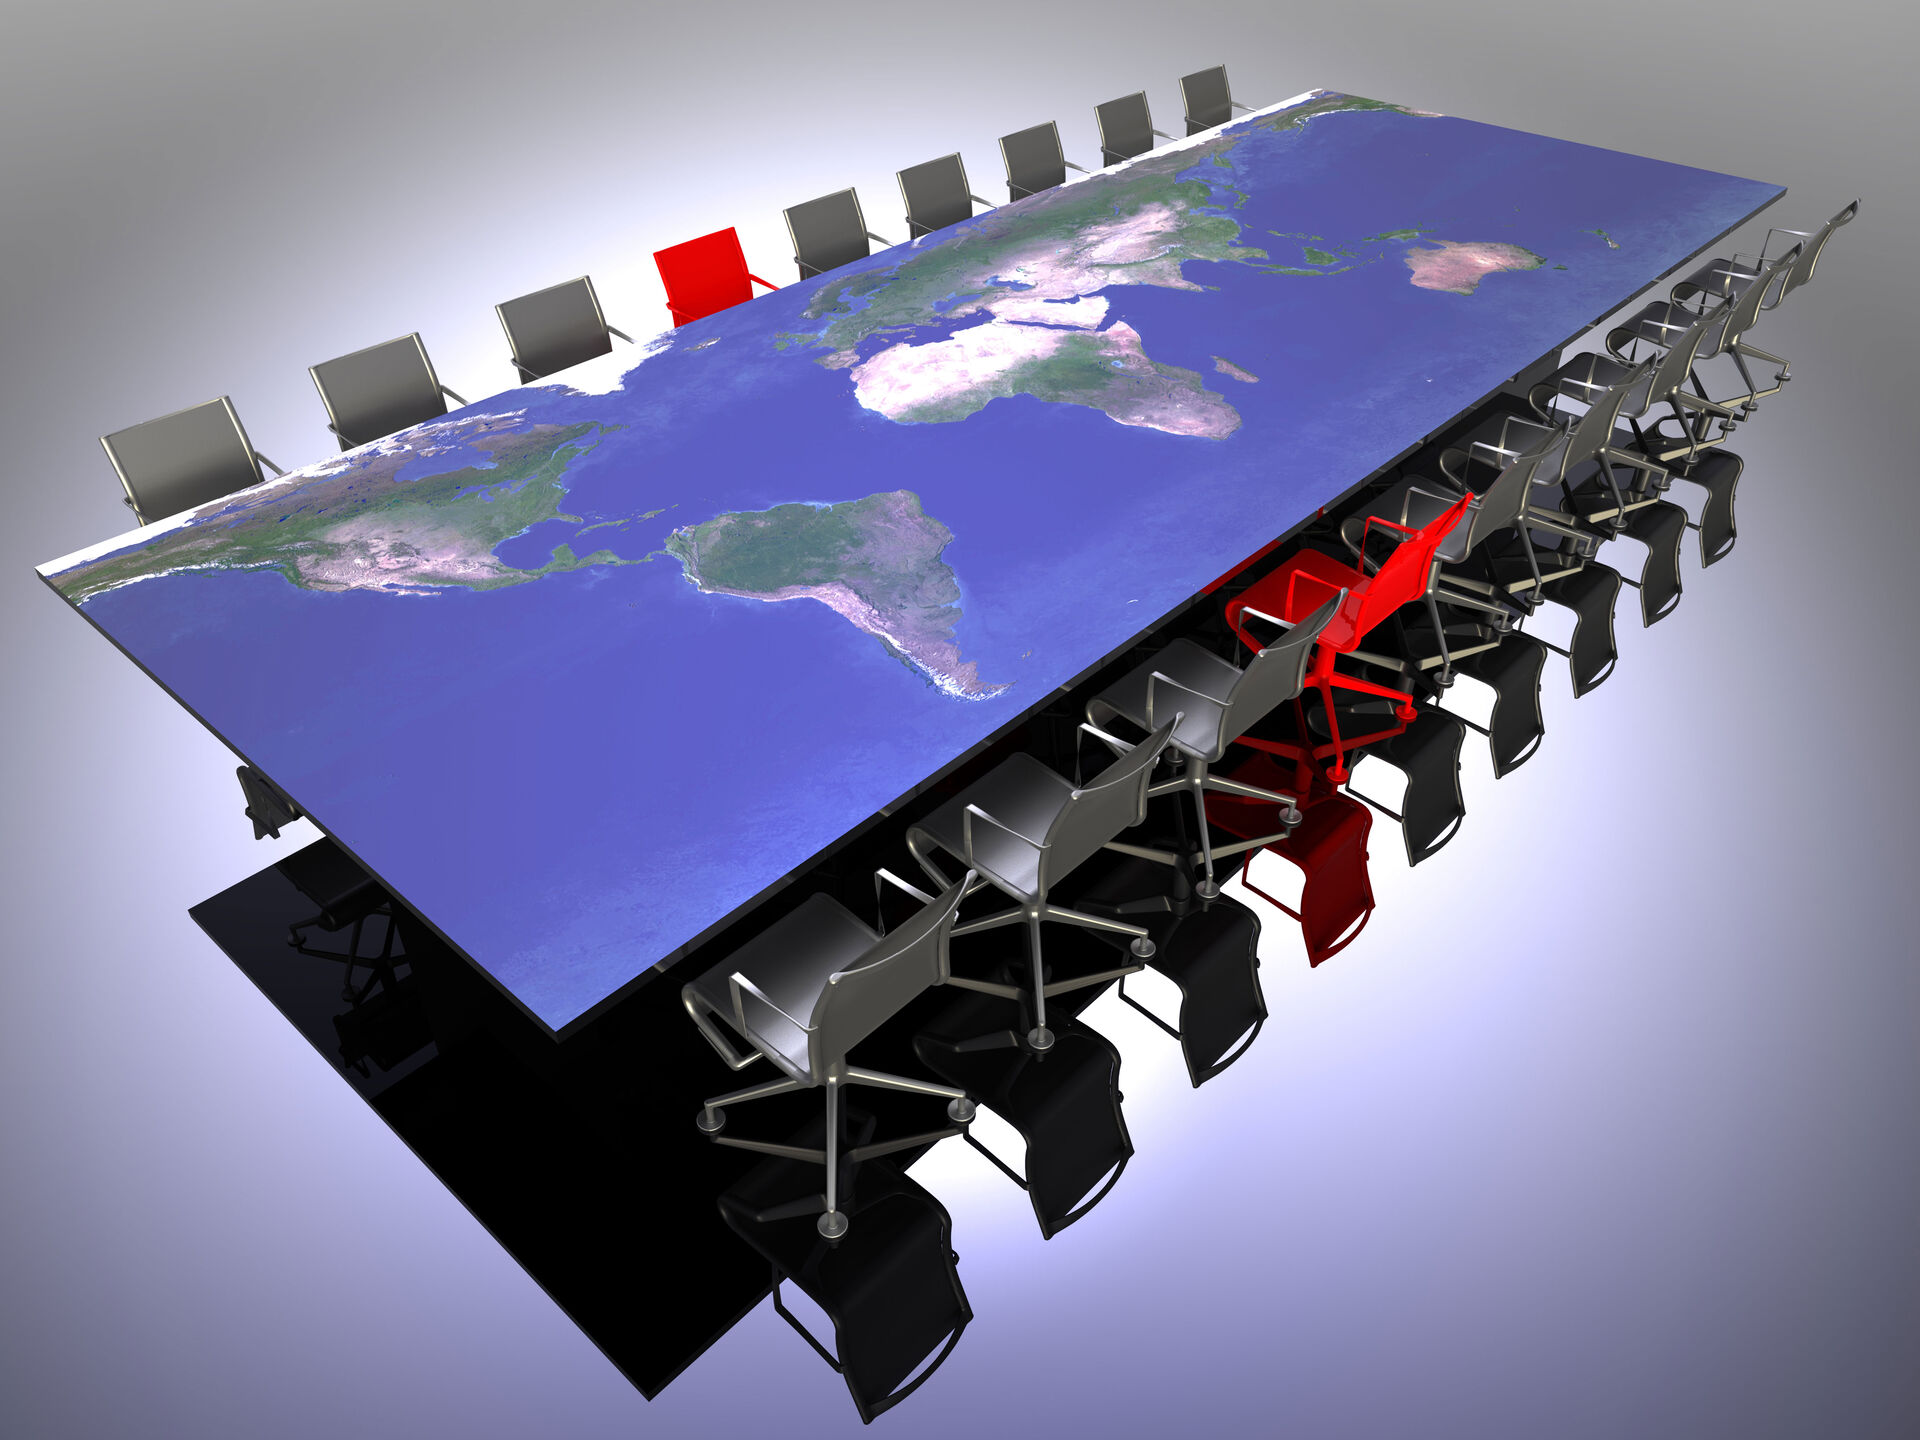 Meeting room with big table and world map printed on the table